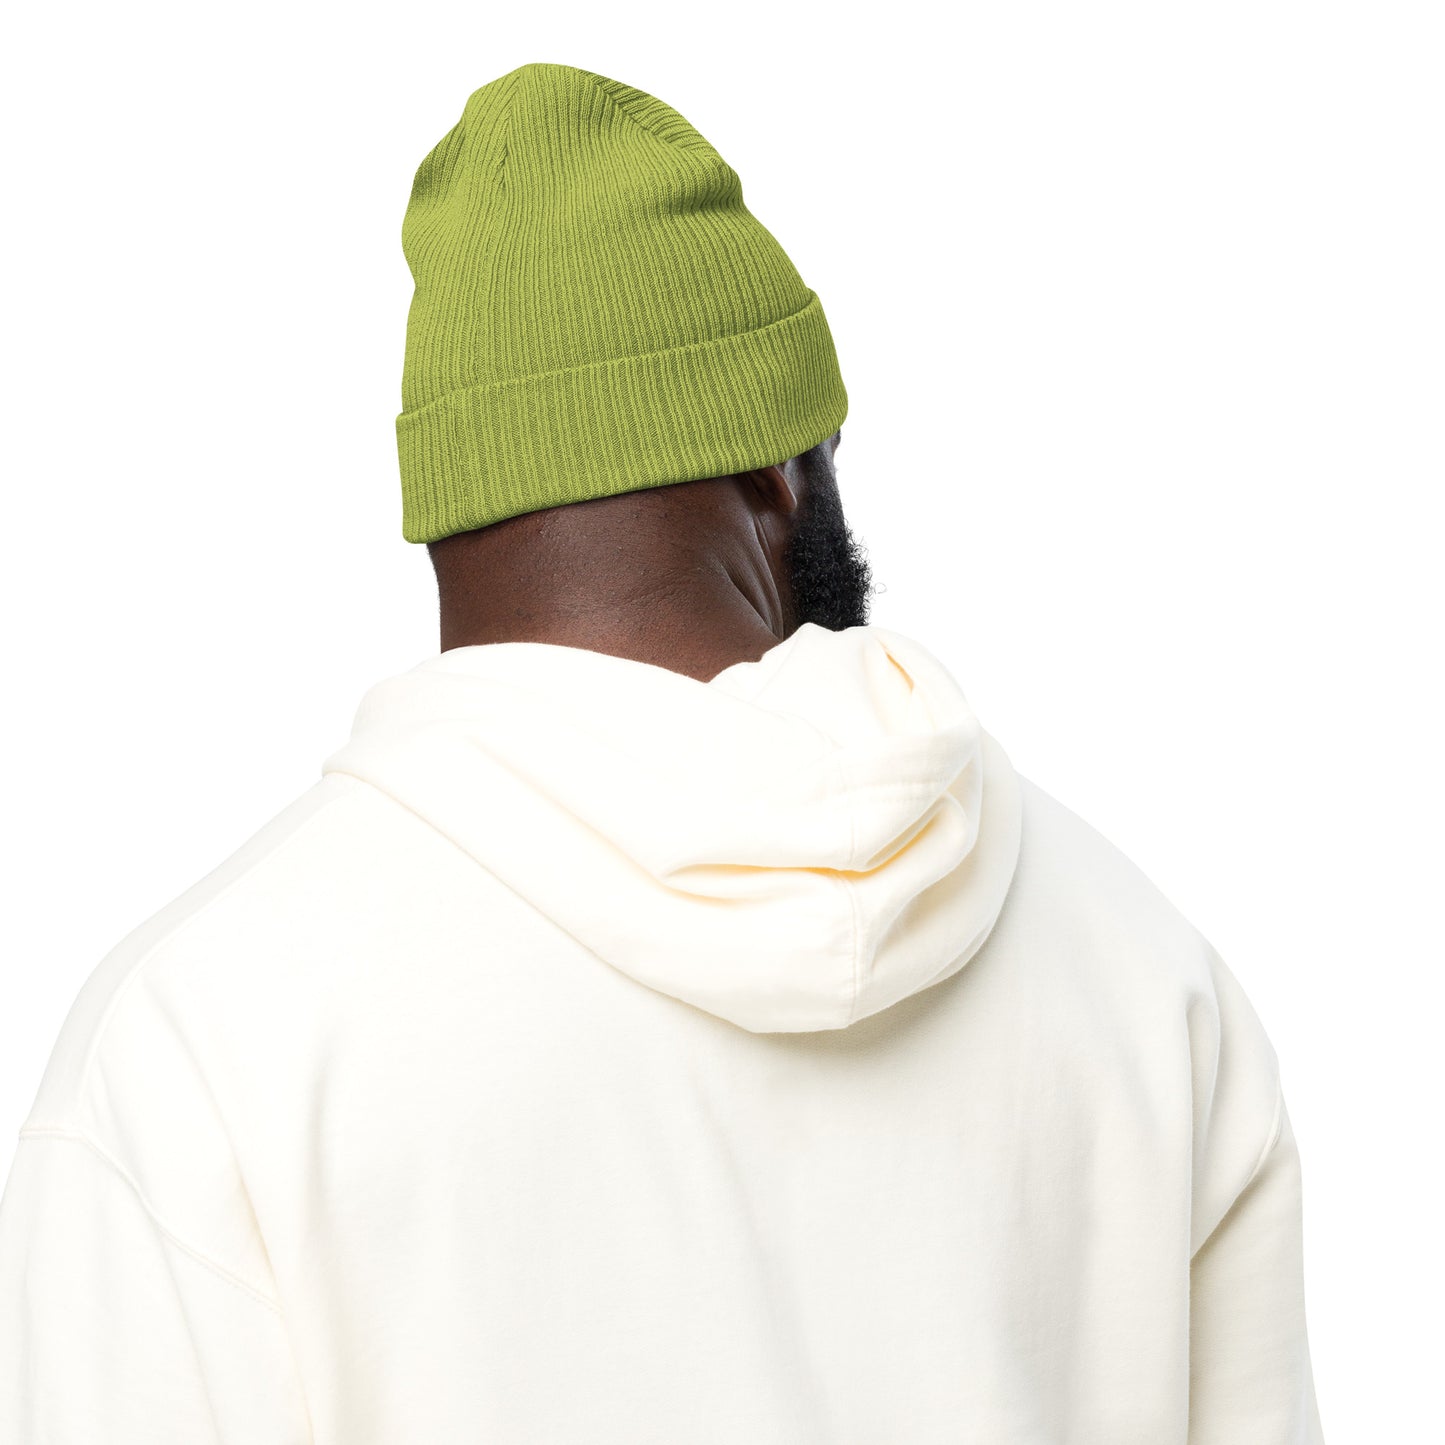 SimpleCycle Organic Ribbed Beanie green back view